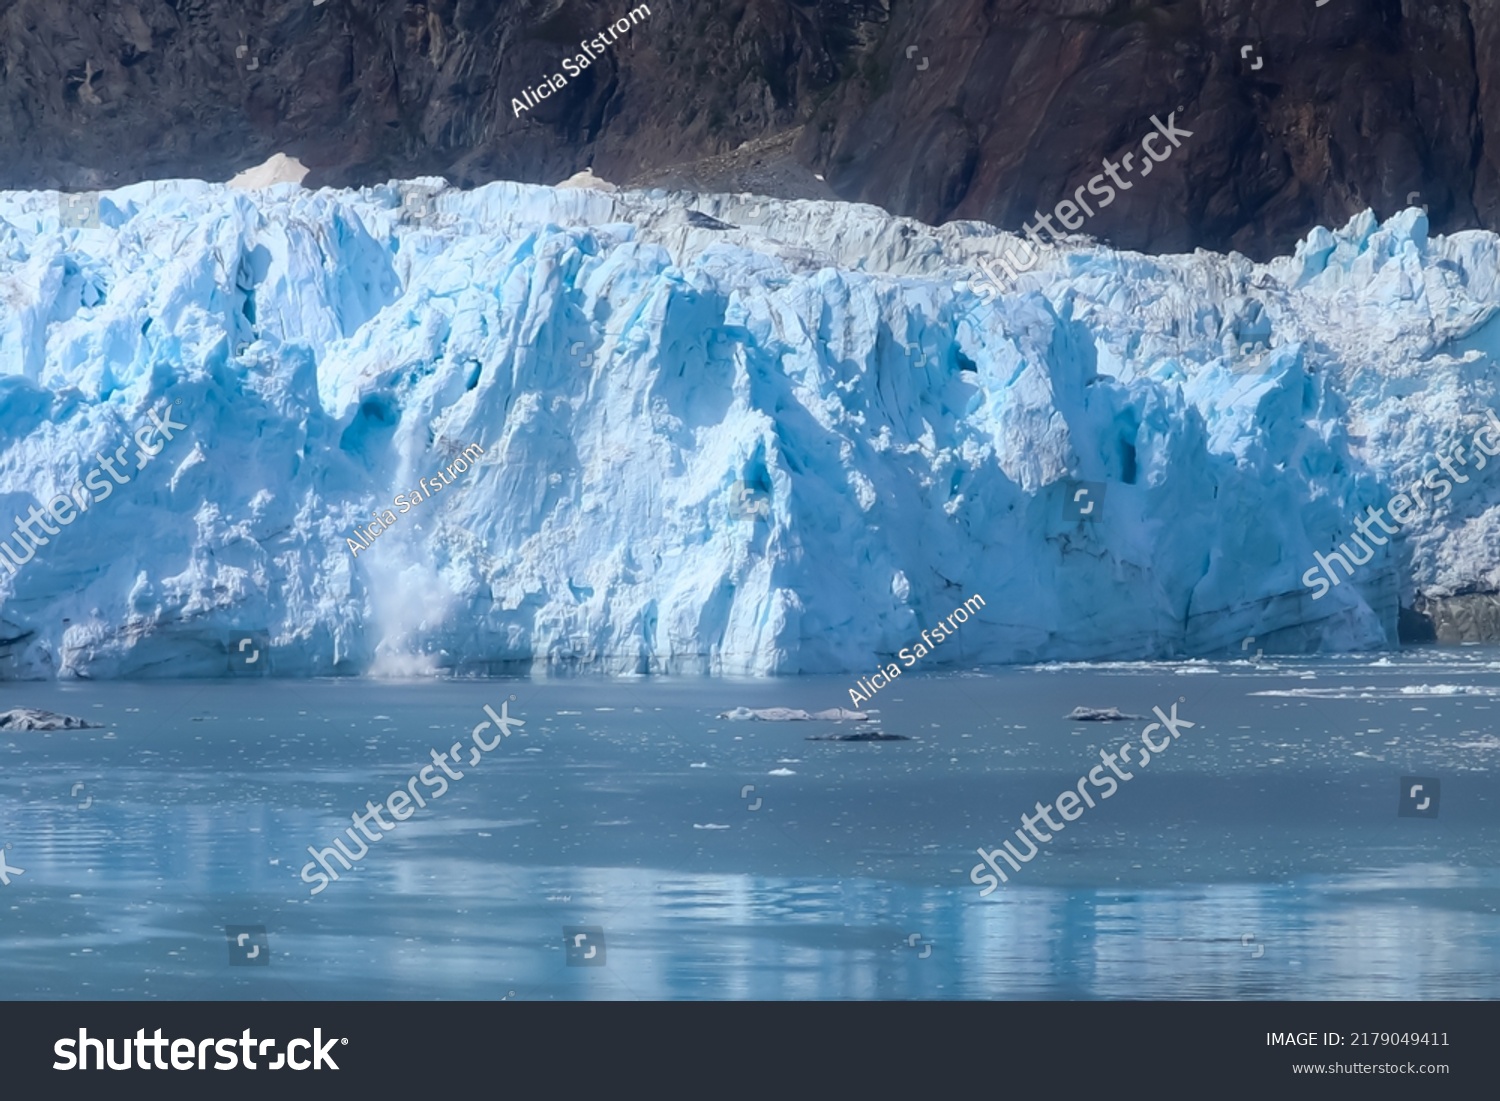 Chunks of ice fall off the face of a glacier into the sea #2179049411